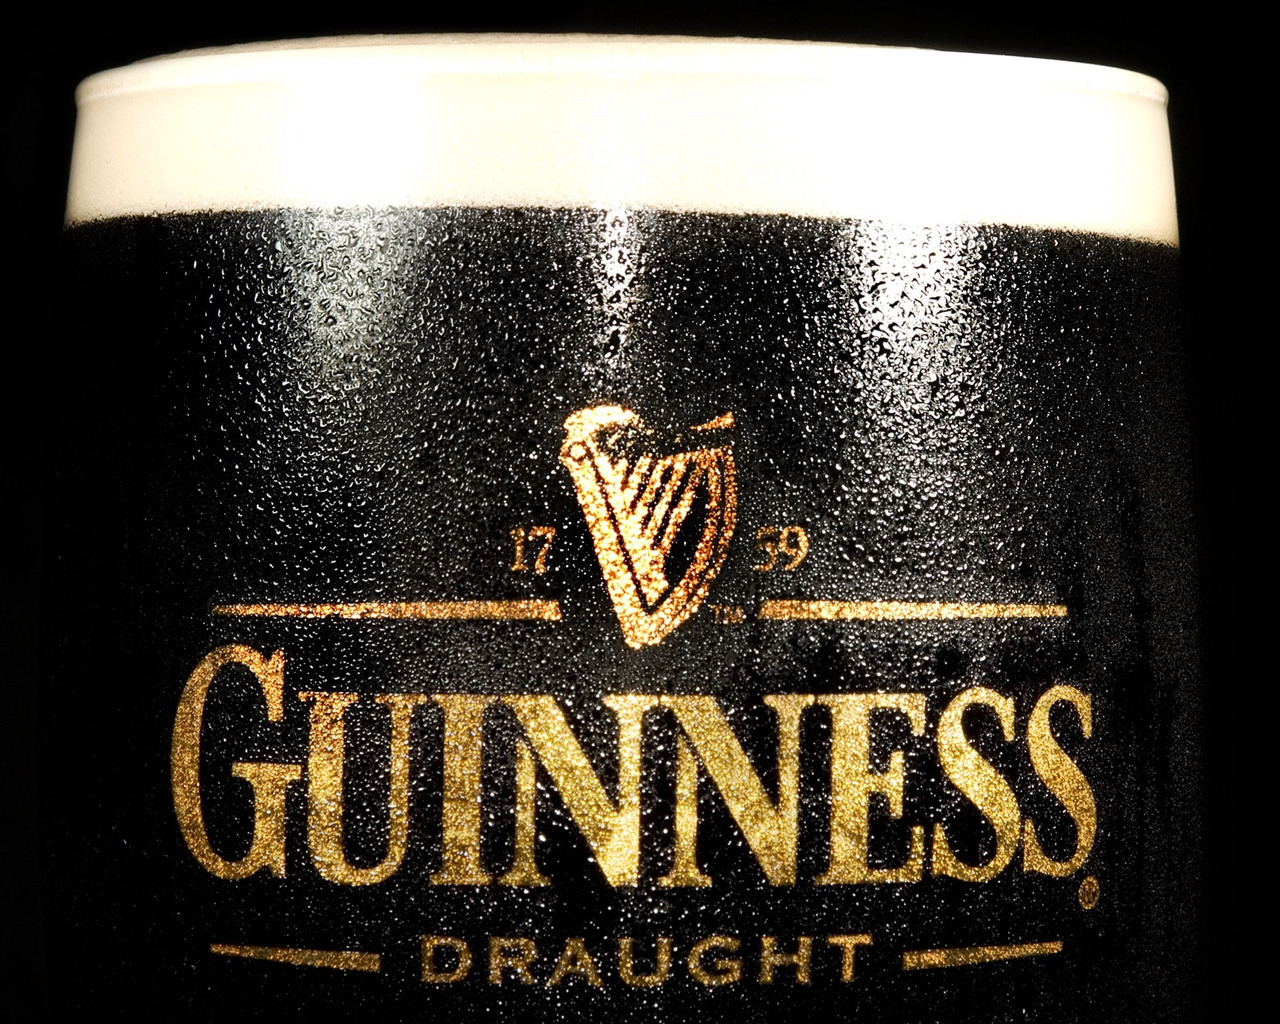 Guinness Draught for 1280 x 1024 resolution